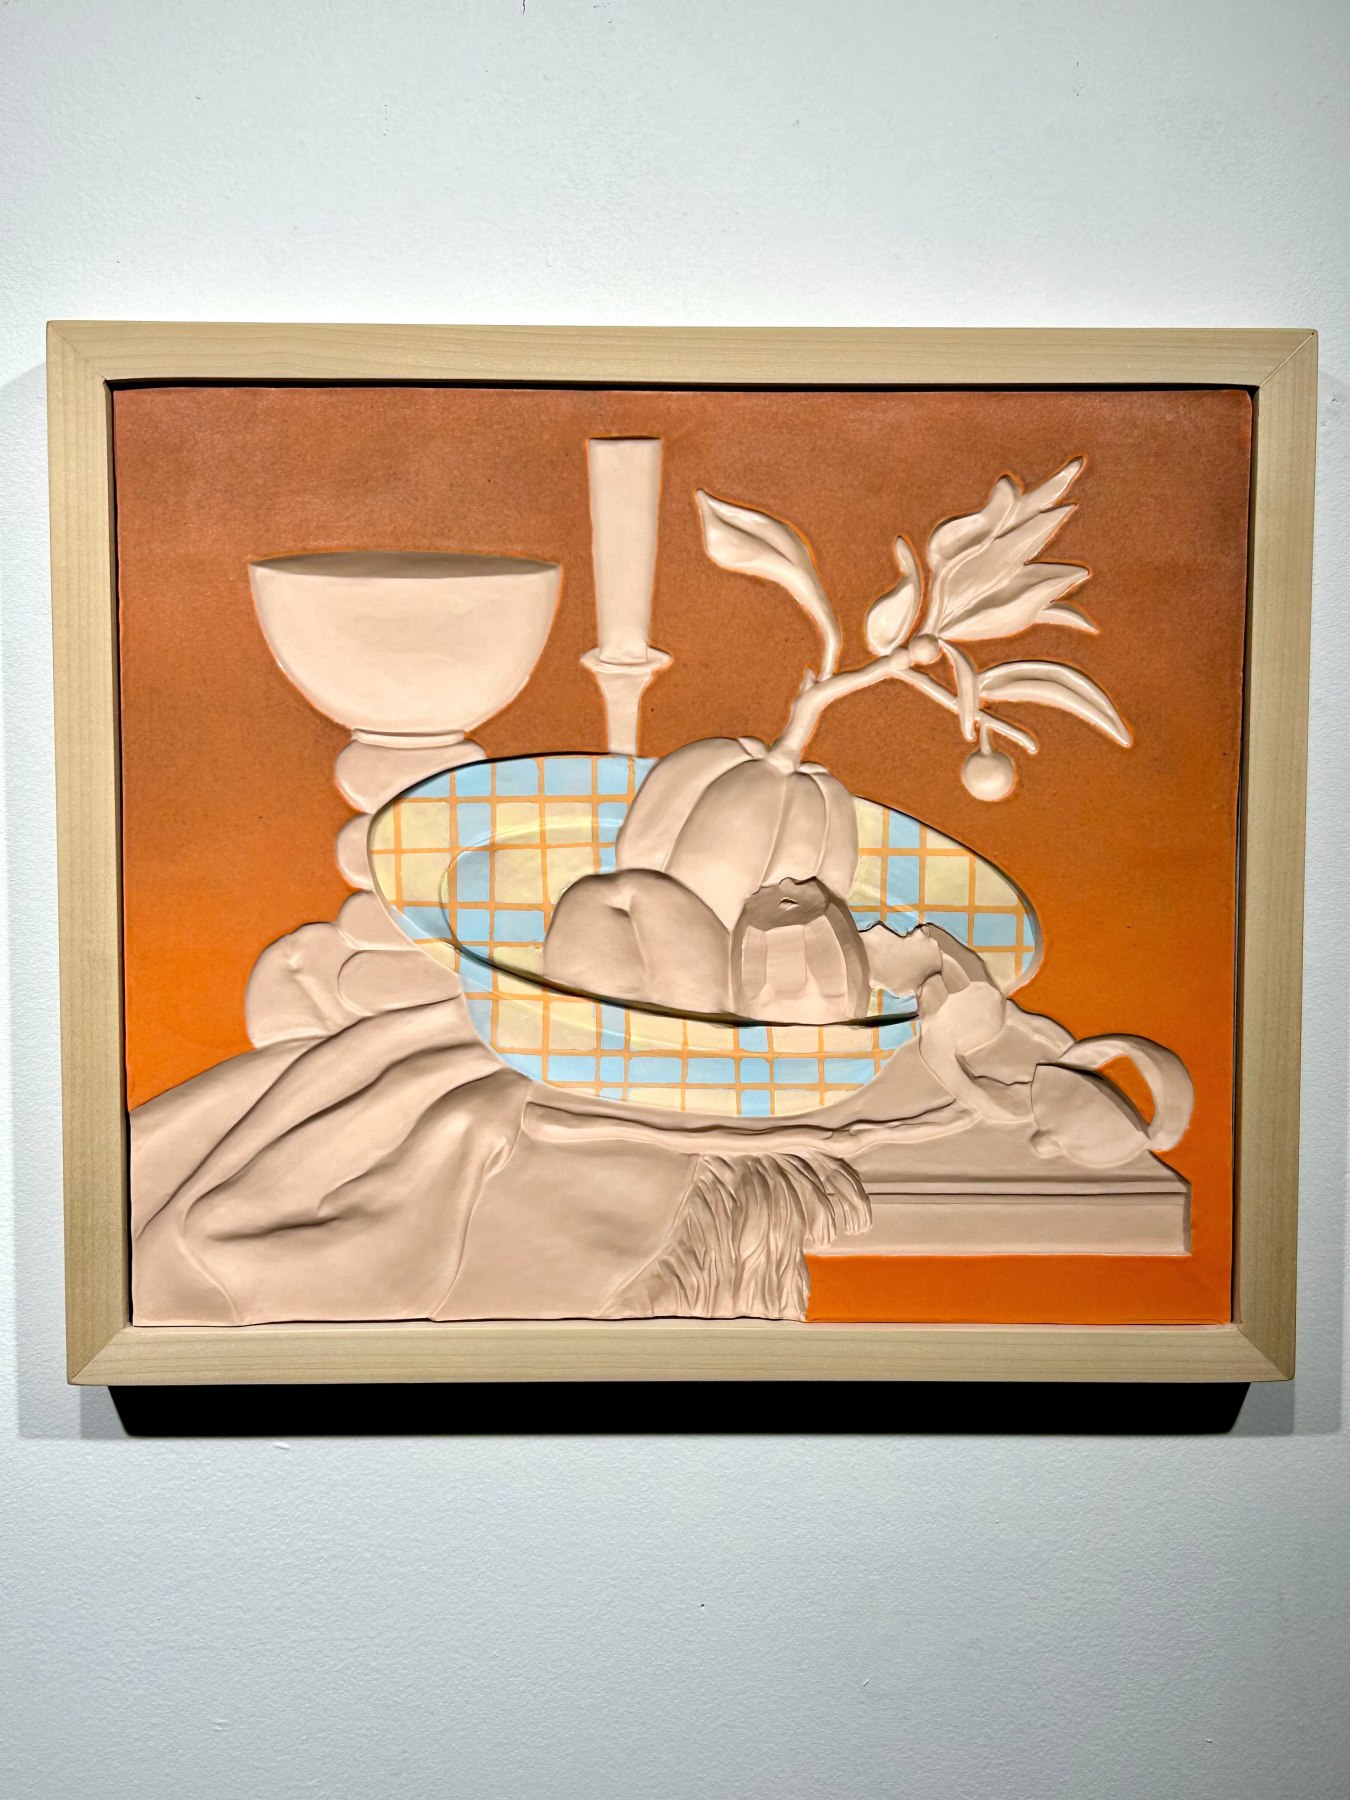 DIRK STASCHKE, Inverted Still life with Plaid Bowl, 2023